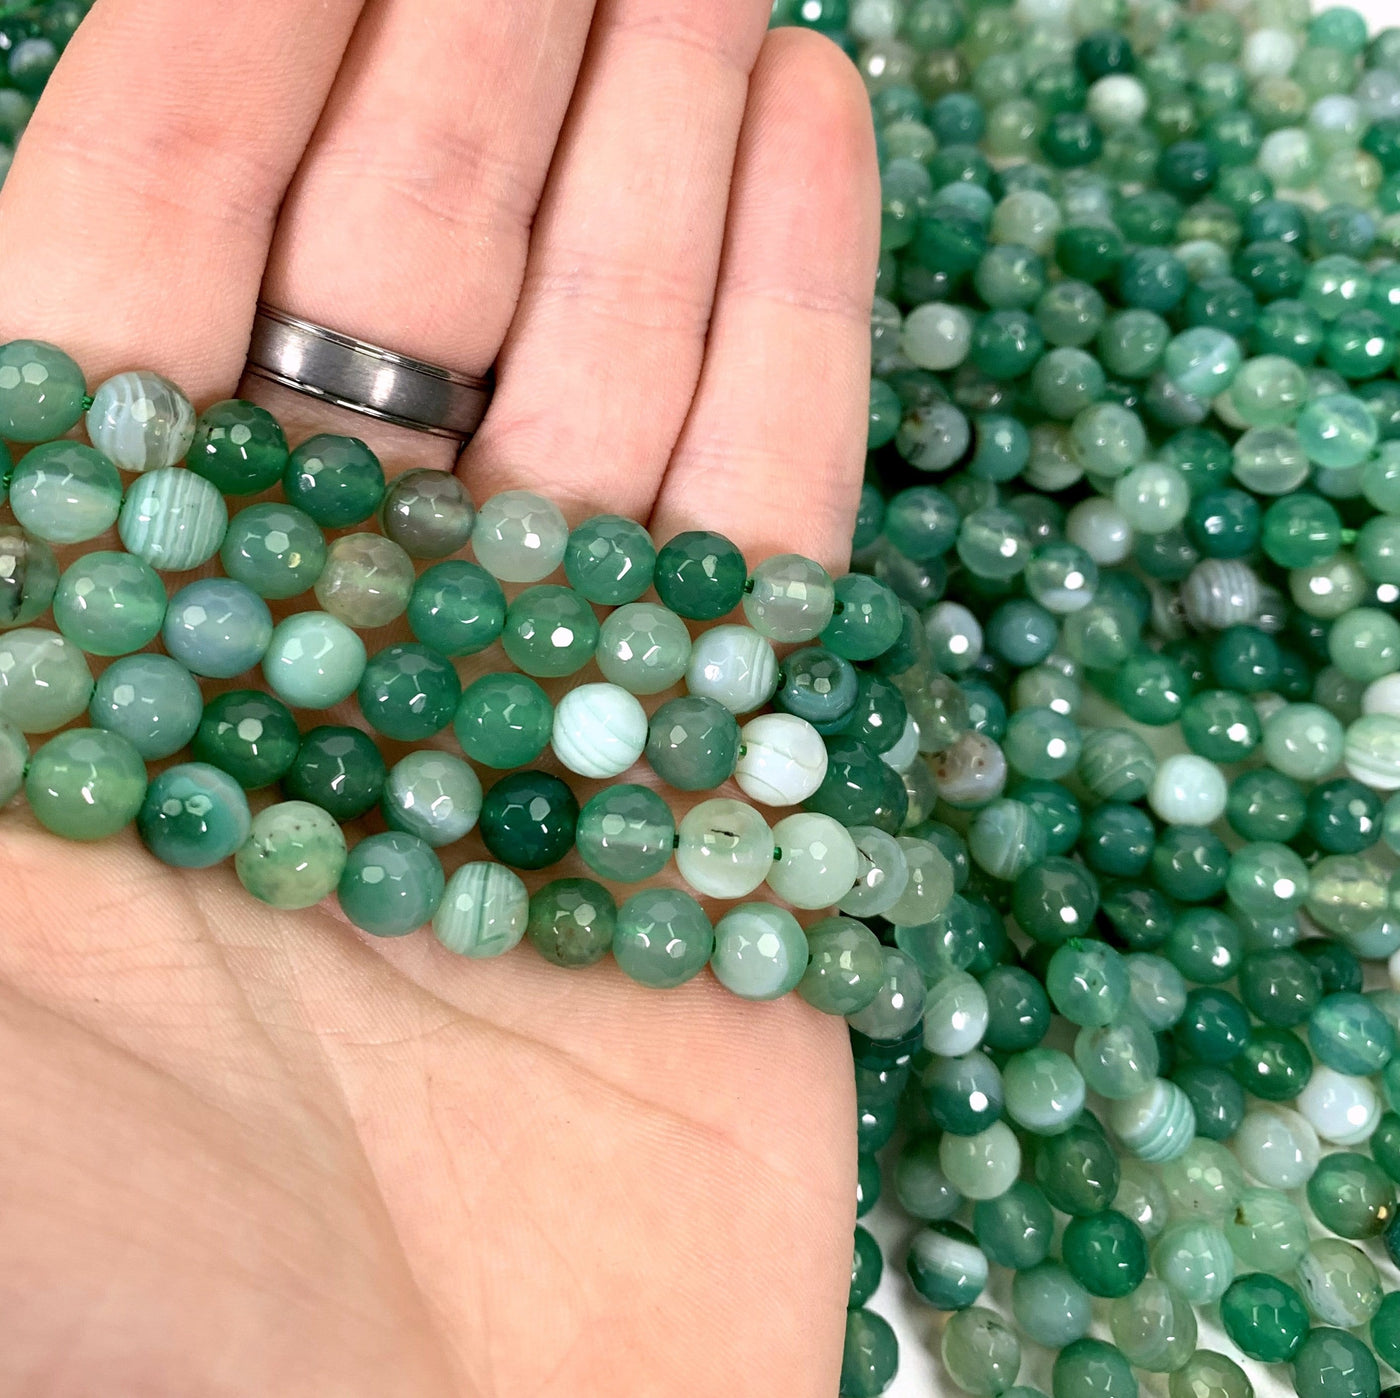 dyed green agate beads in hand